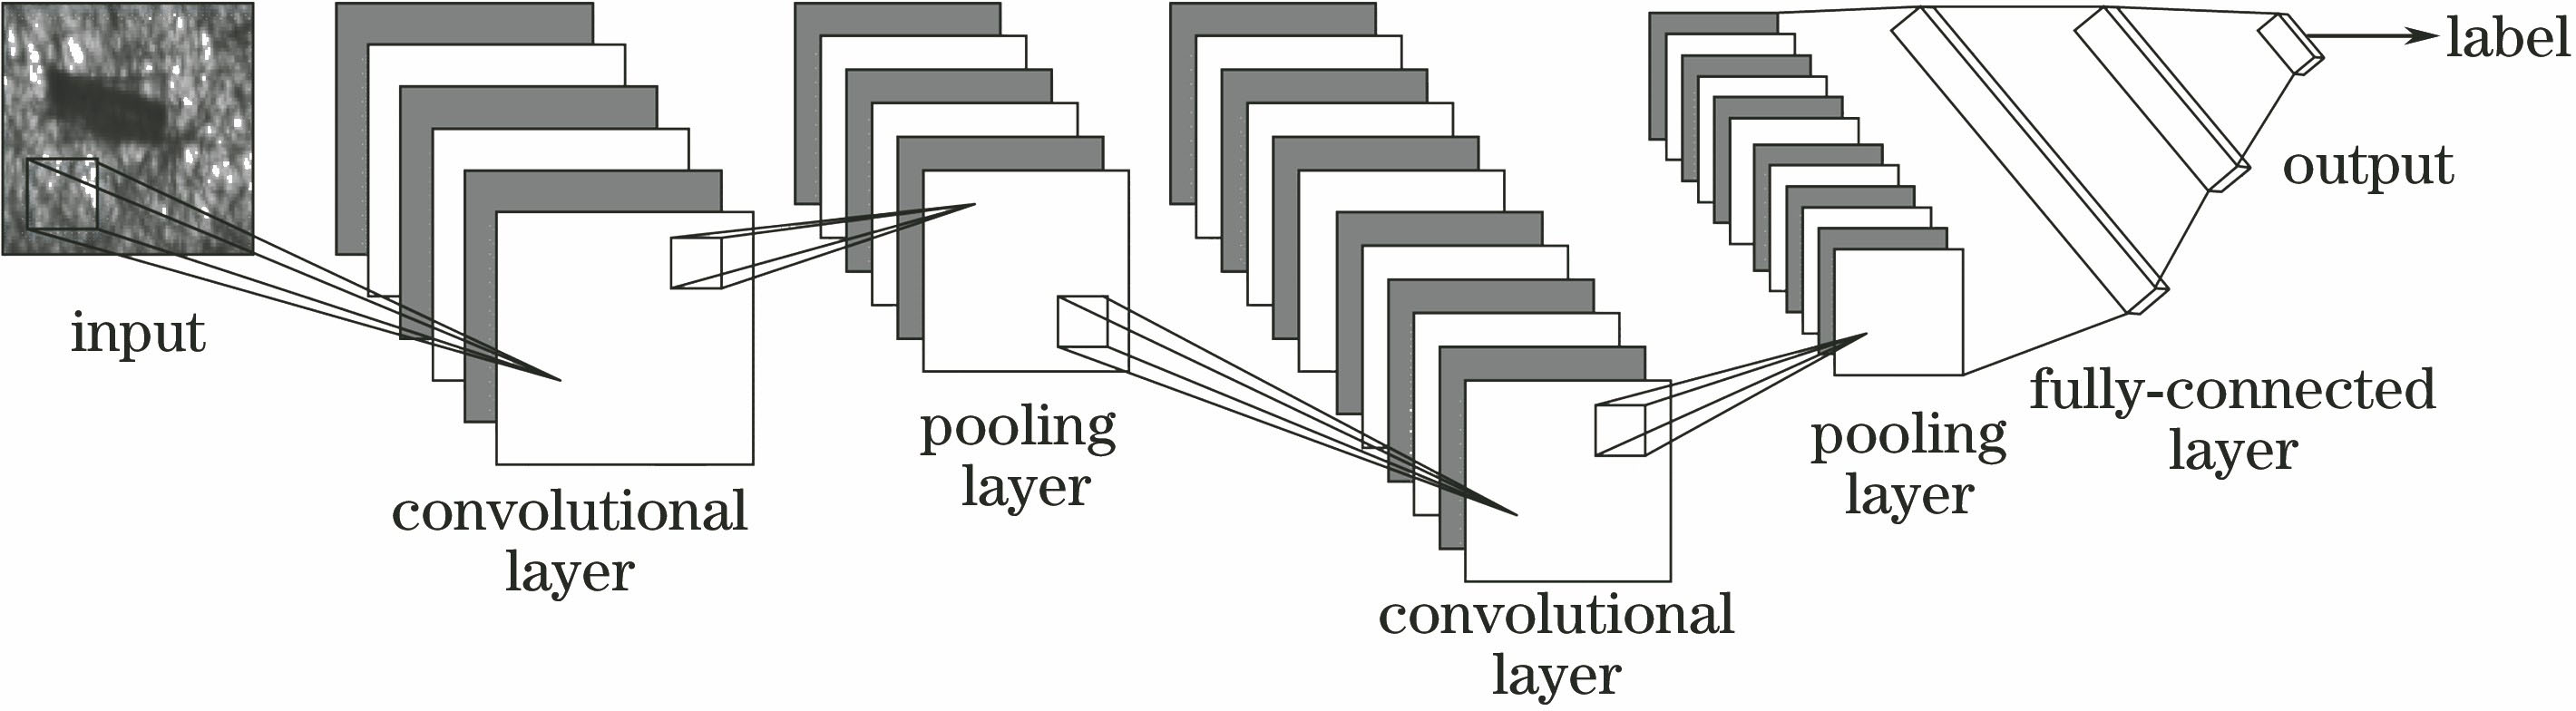 Architecture of convolutional neural network model